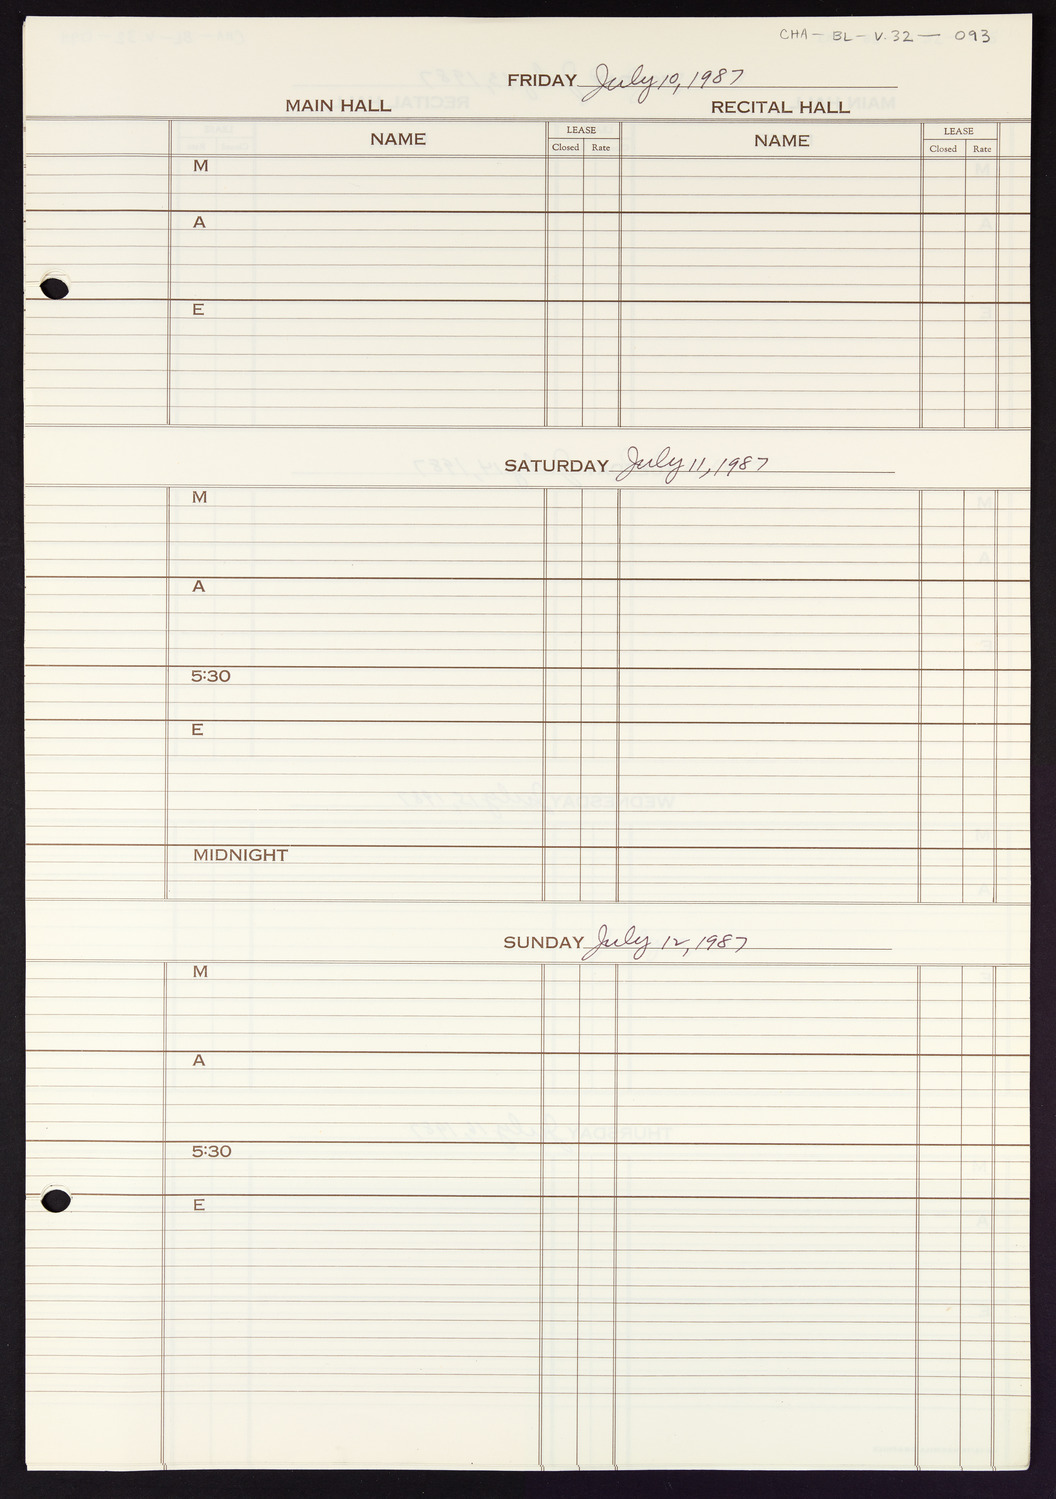 Carnegie Hall Booking Ledger, volume 32, page 93